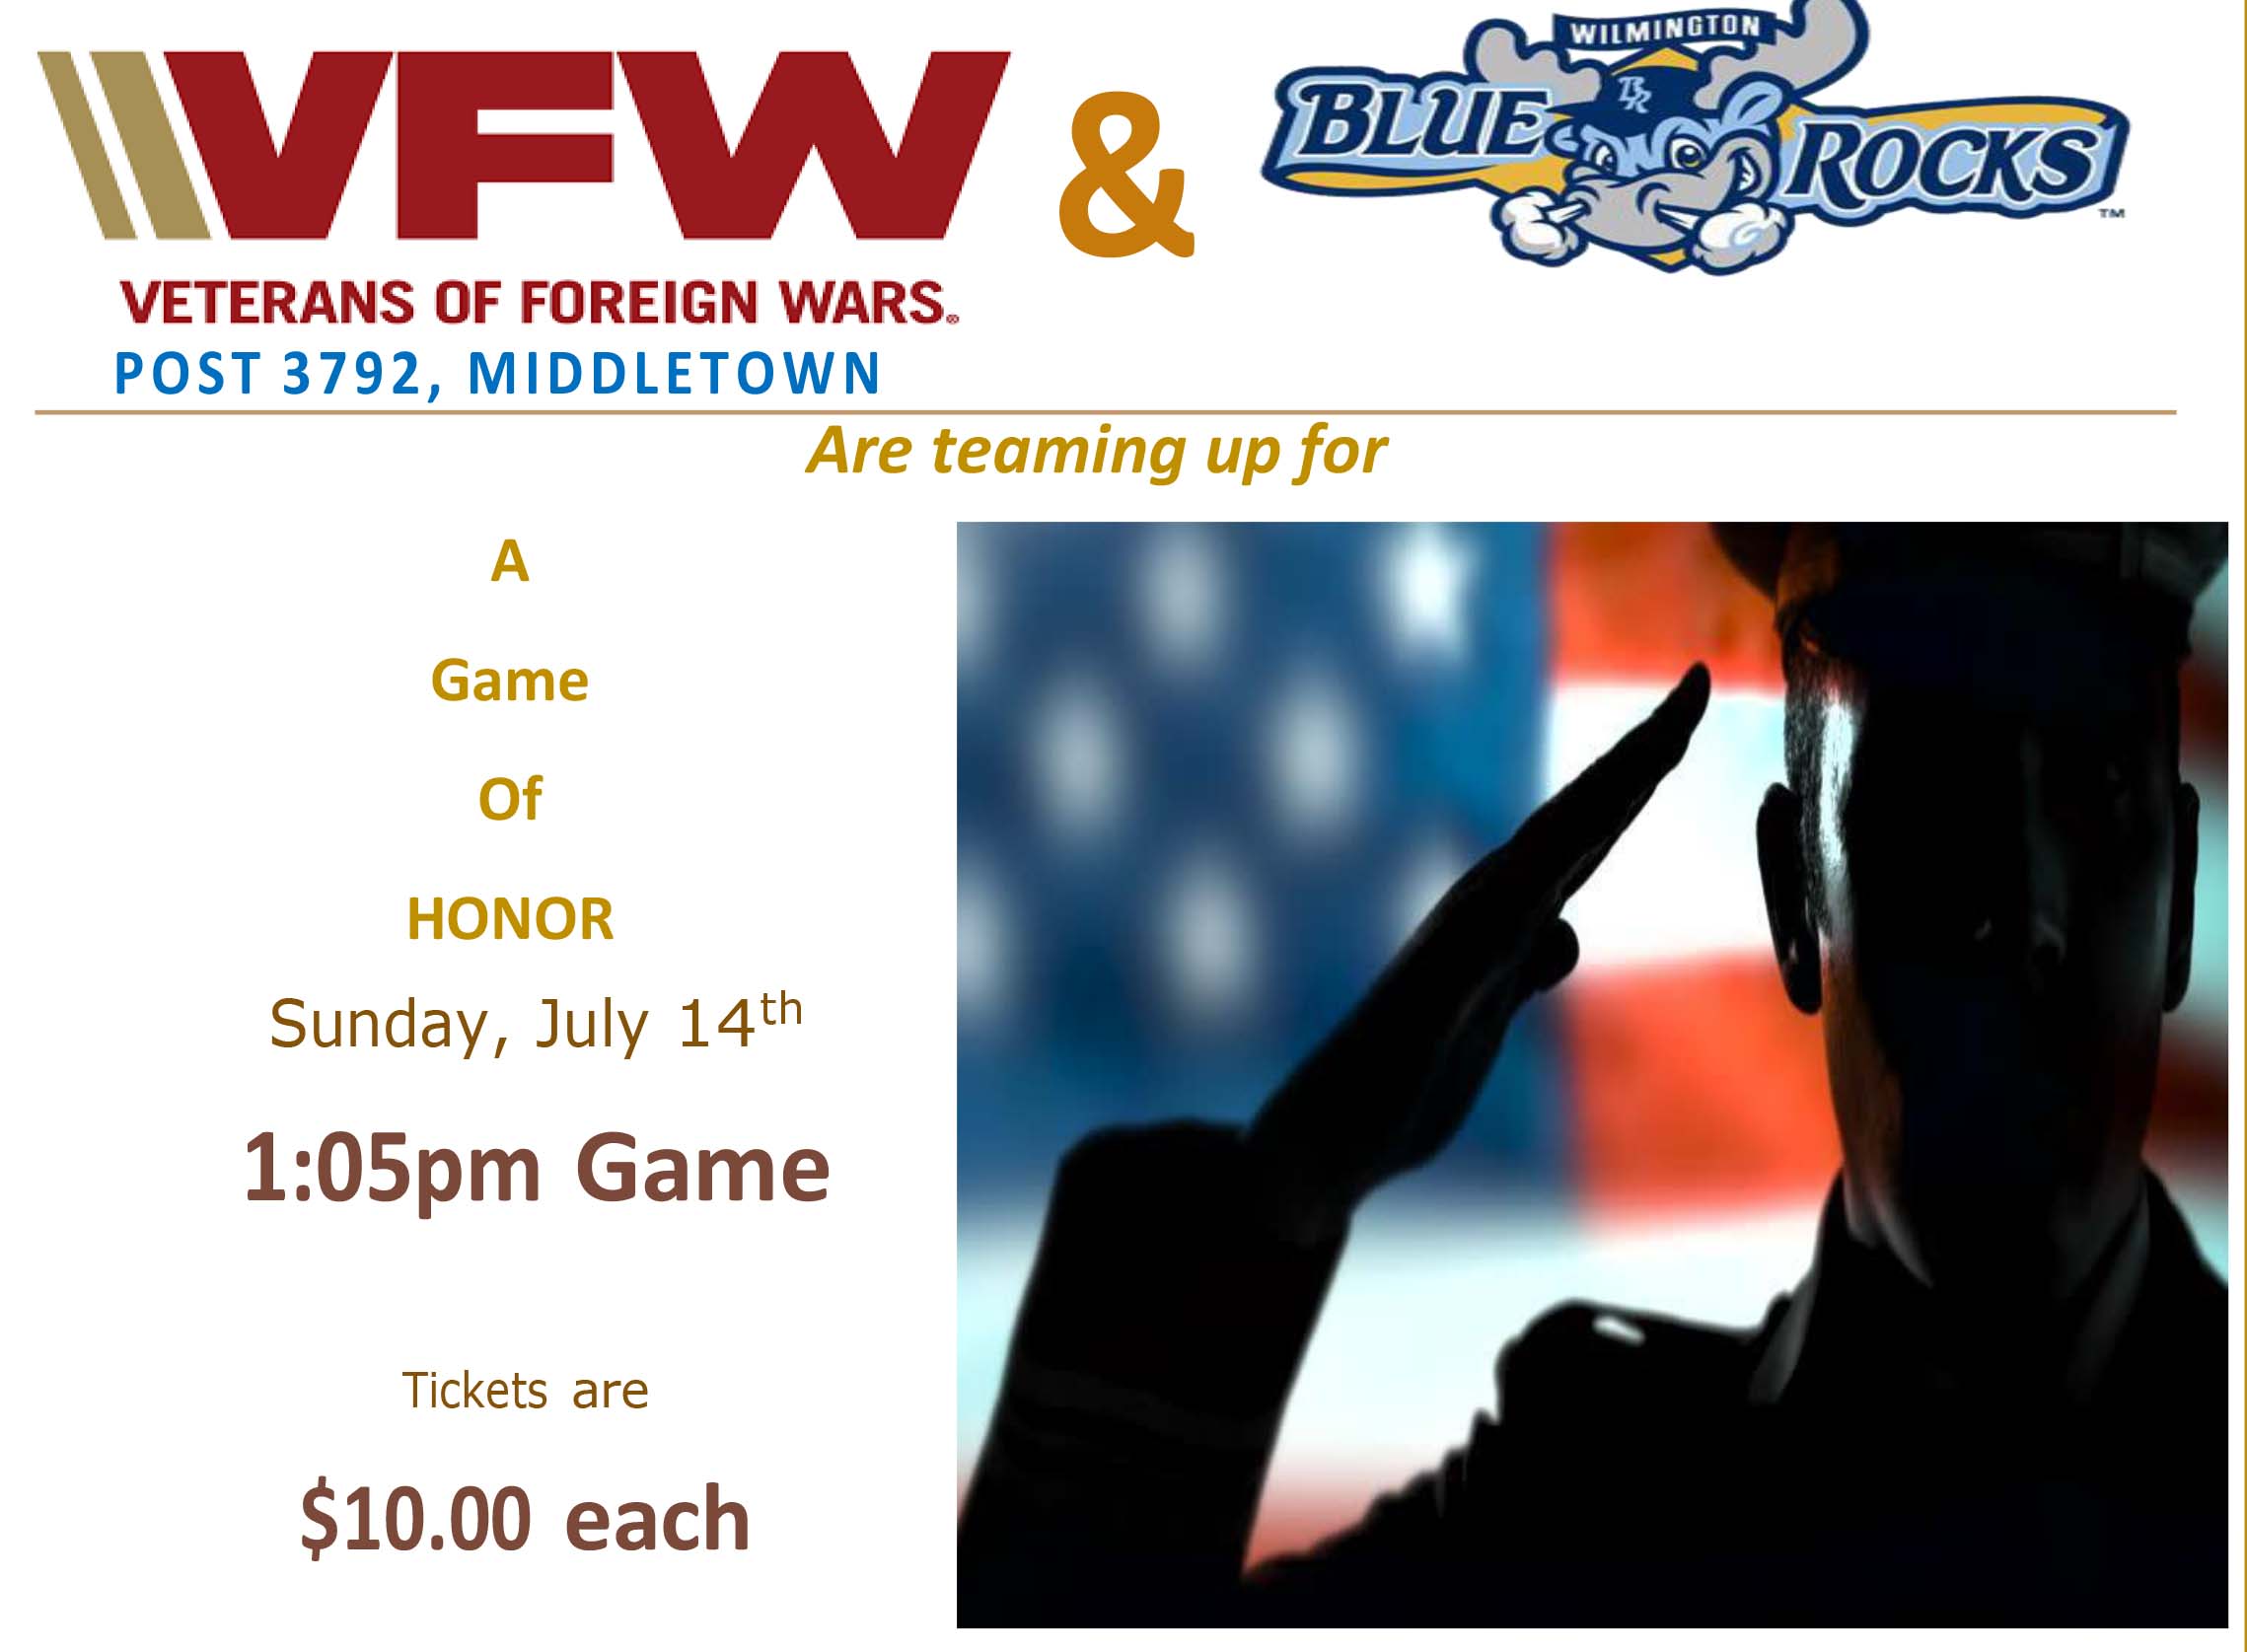 Blue Rocks Game of Honor